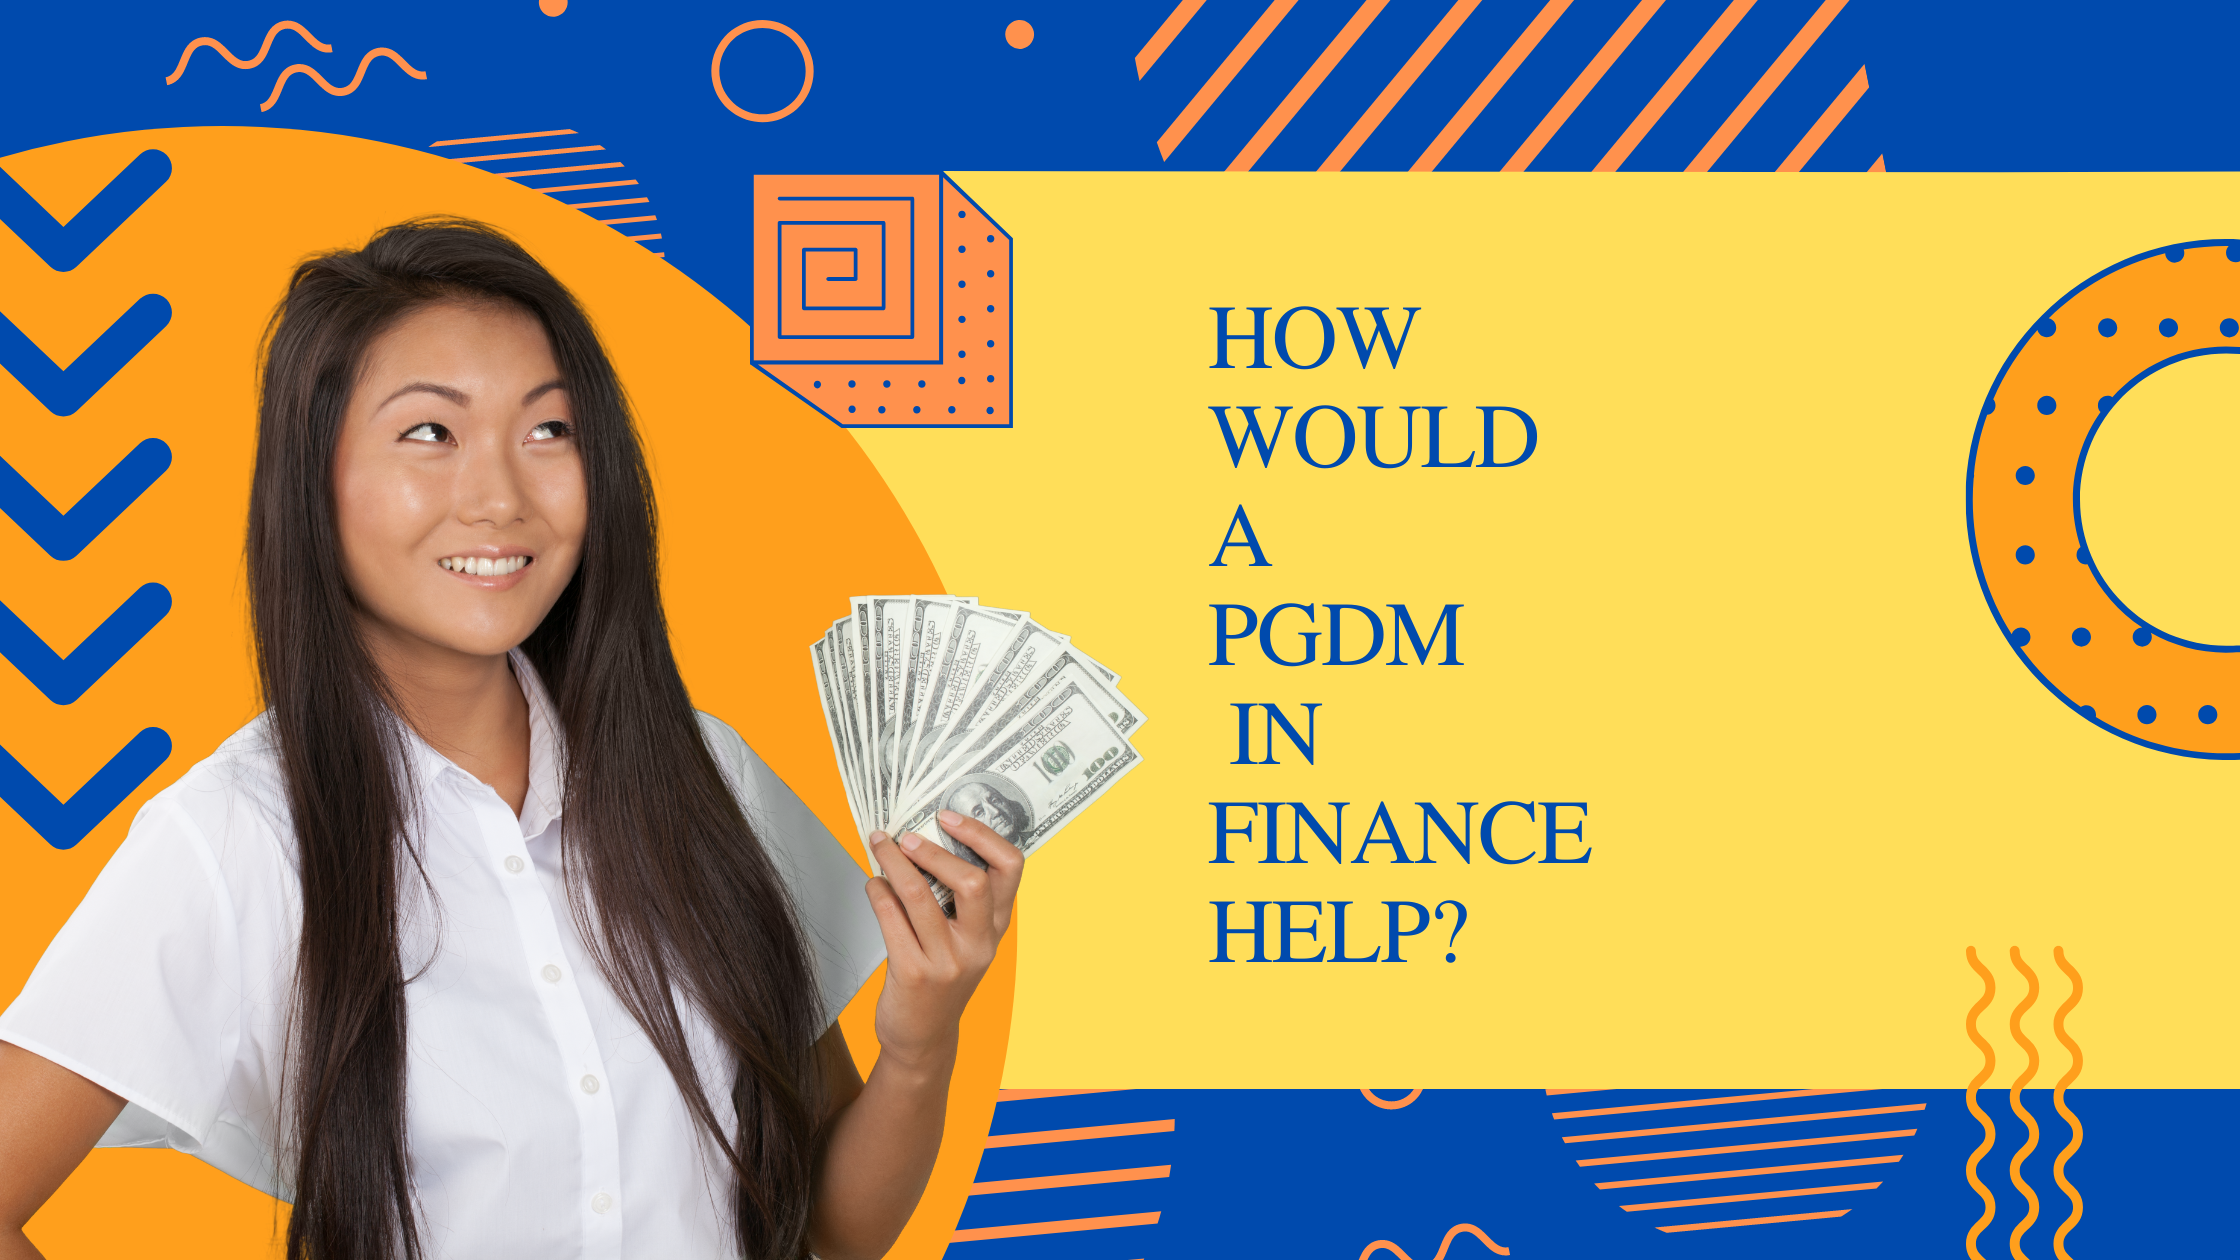 How Would a PGDM in Finance Help?